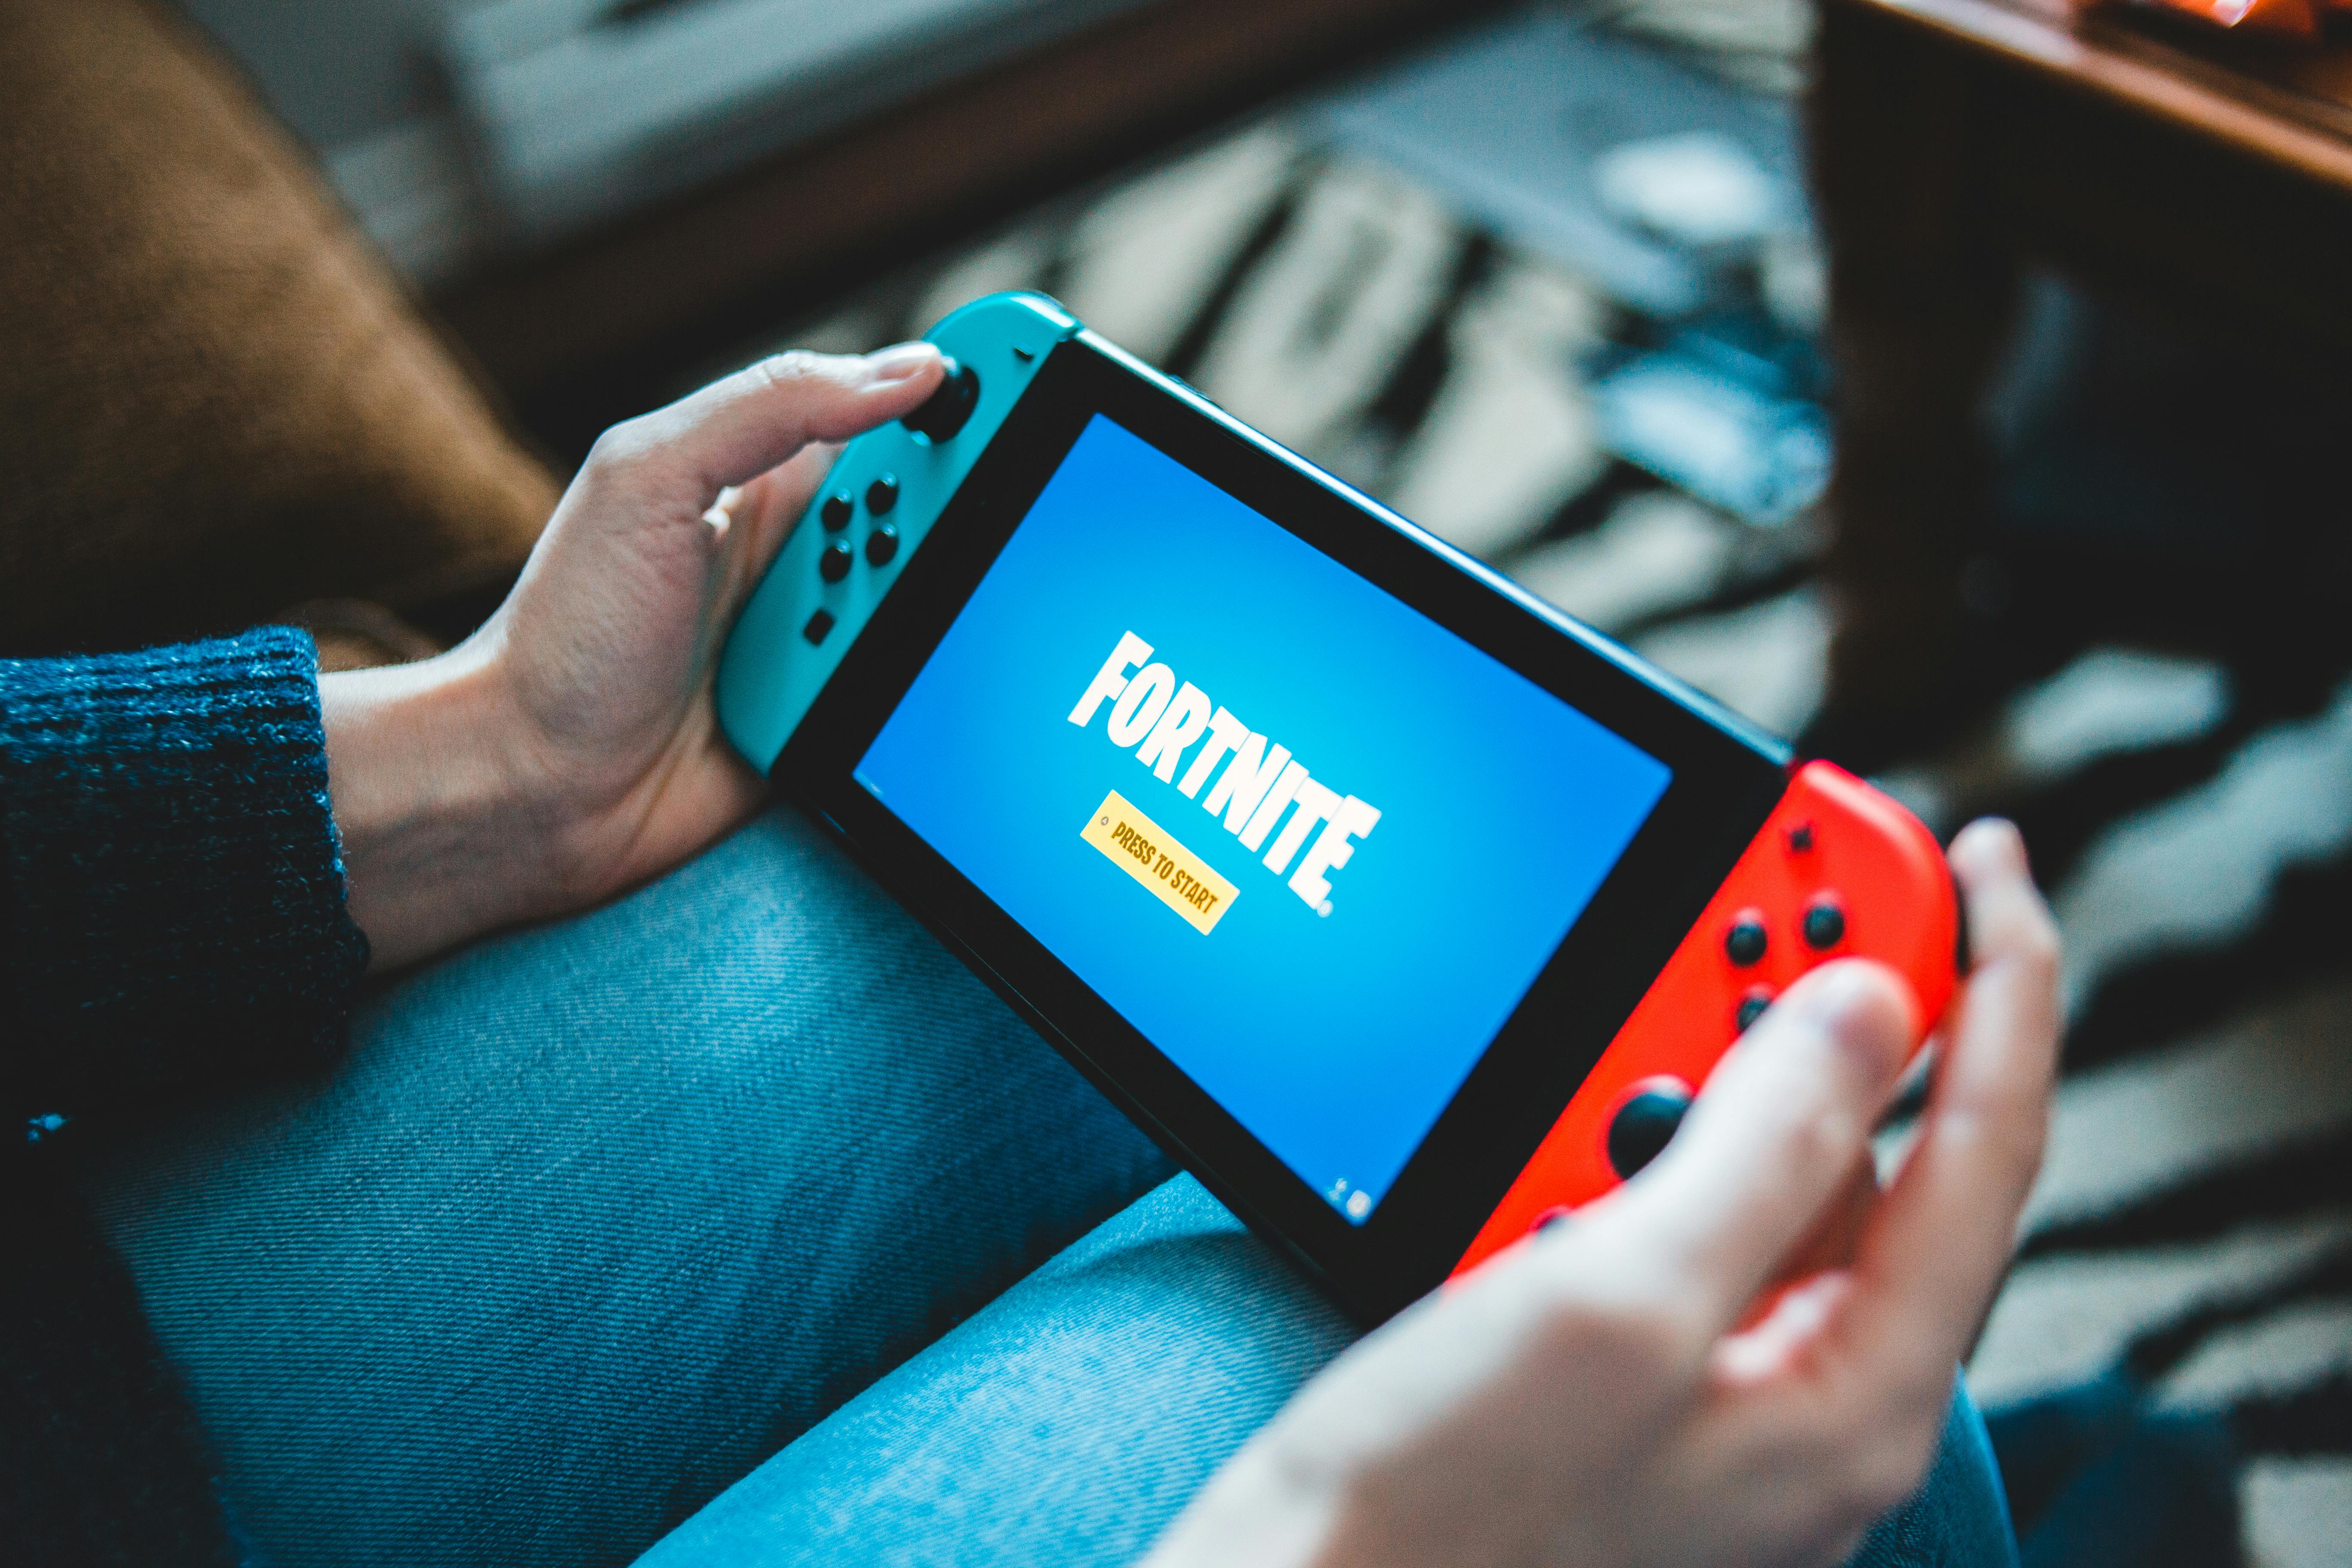 Free nintendo switch image from pexels